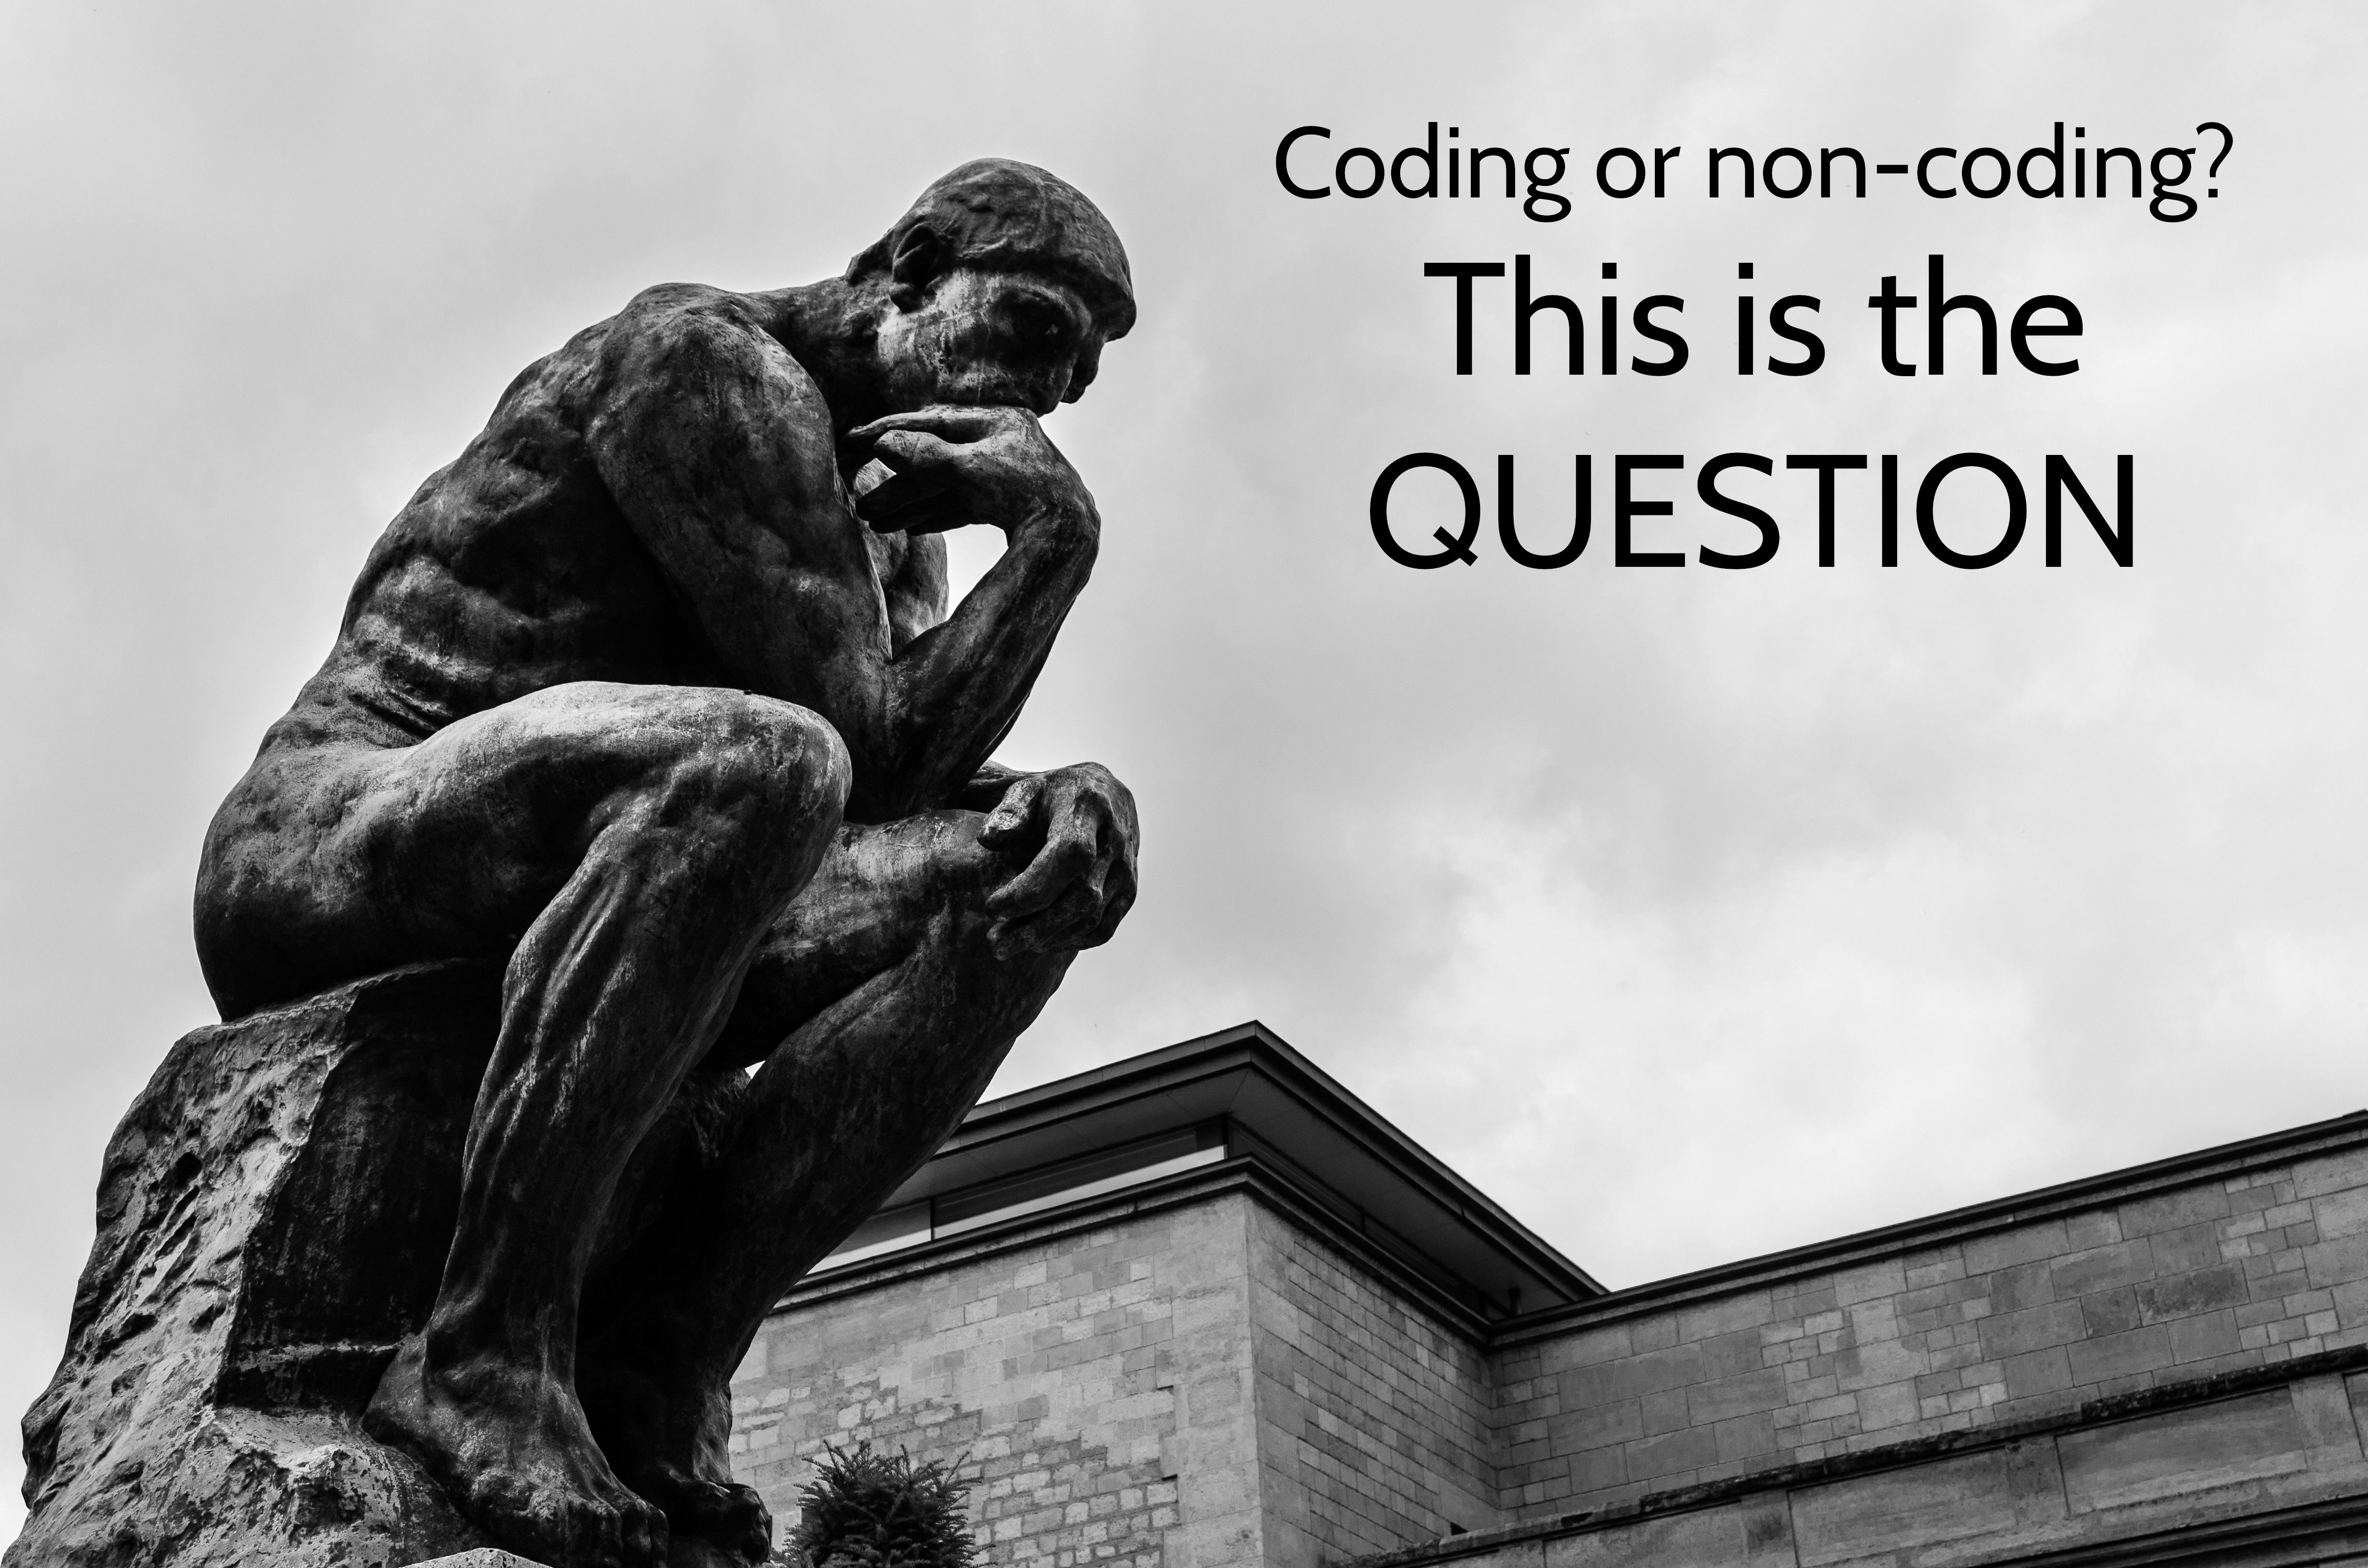 Coding or non-coding? This is the question.